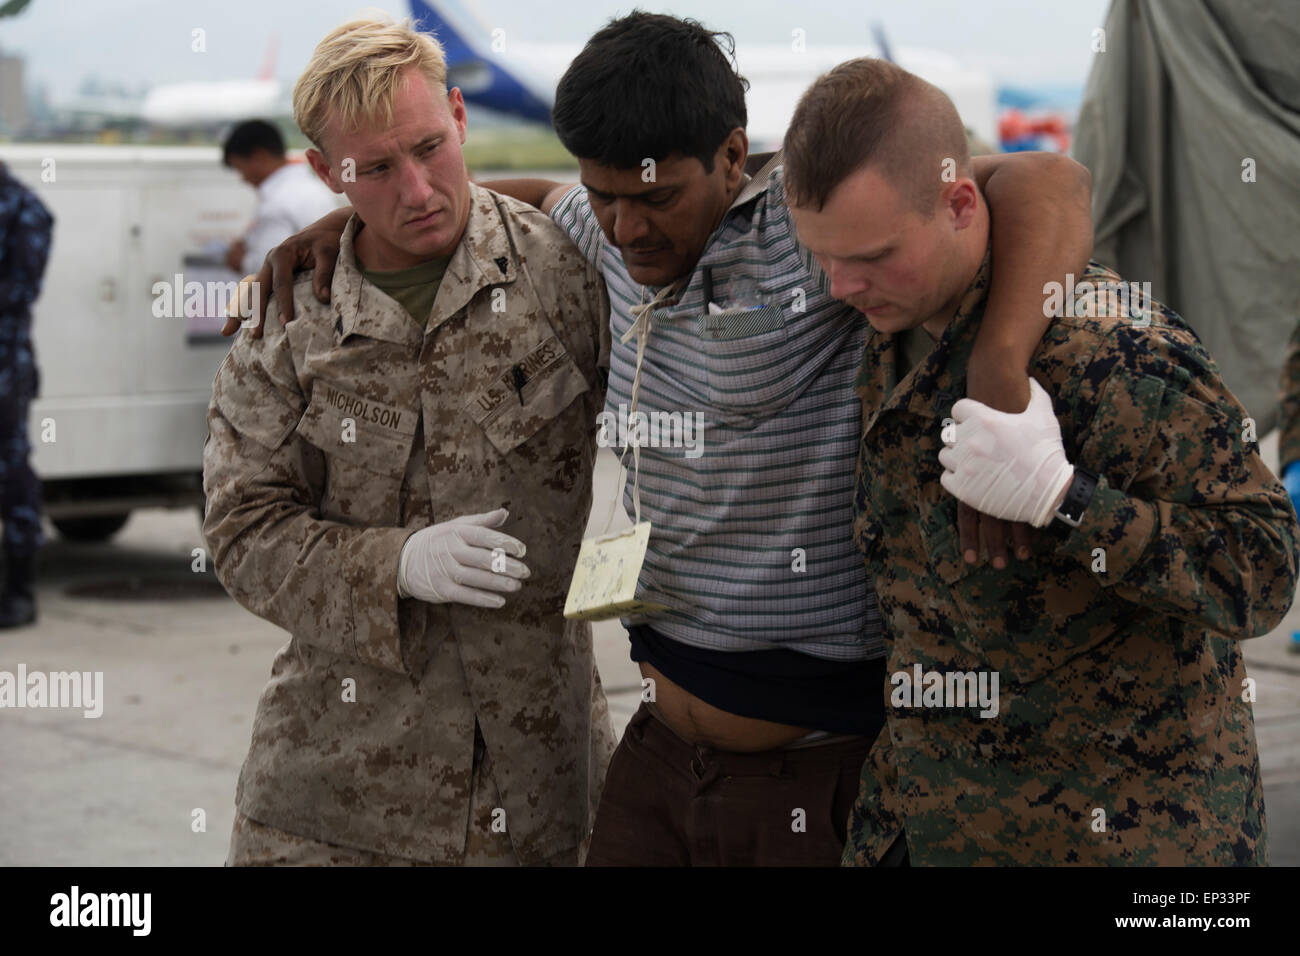 Kathmandu, Nepal. 13th May, 2015. U.S. Marines with Joint Task Force 505 help a man to a medical triage area setup at Tribhuvan International Airport May 12, 2015 in Kathmandu, Nepal. A 7.3 magnitude aftershock earthquake struck the kingdom following the 7.8 magnitude earthquake on April 25th. Stock Photo